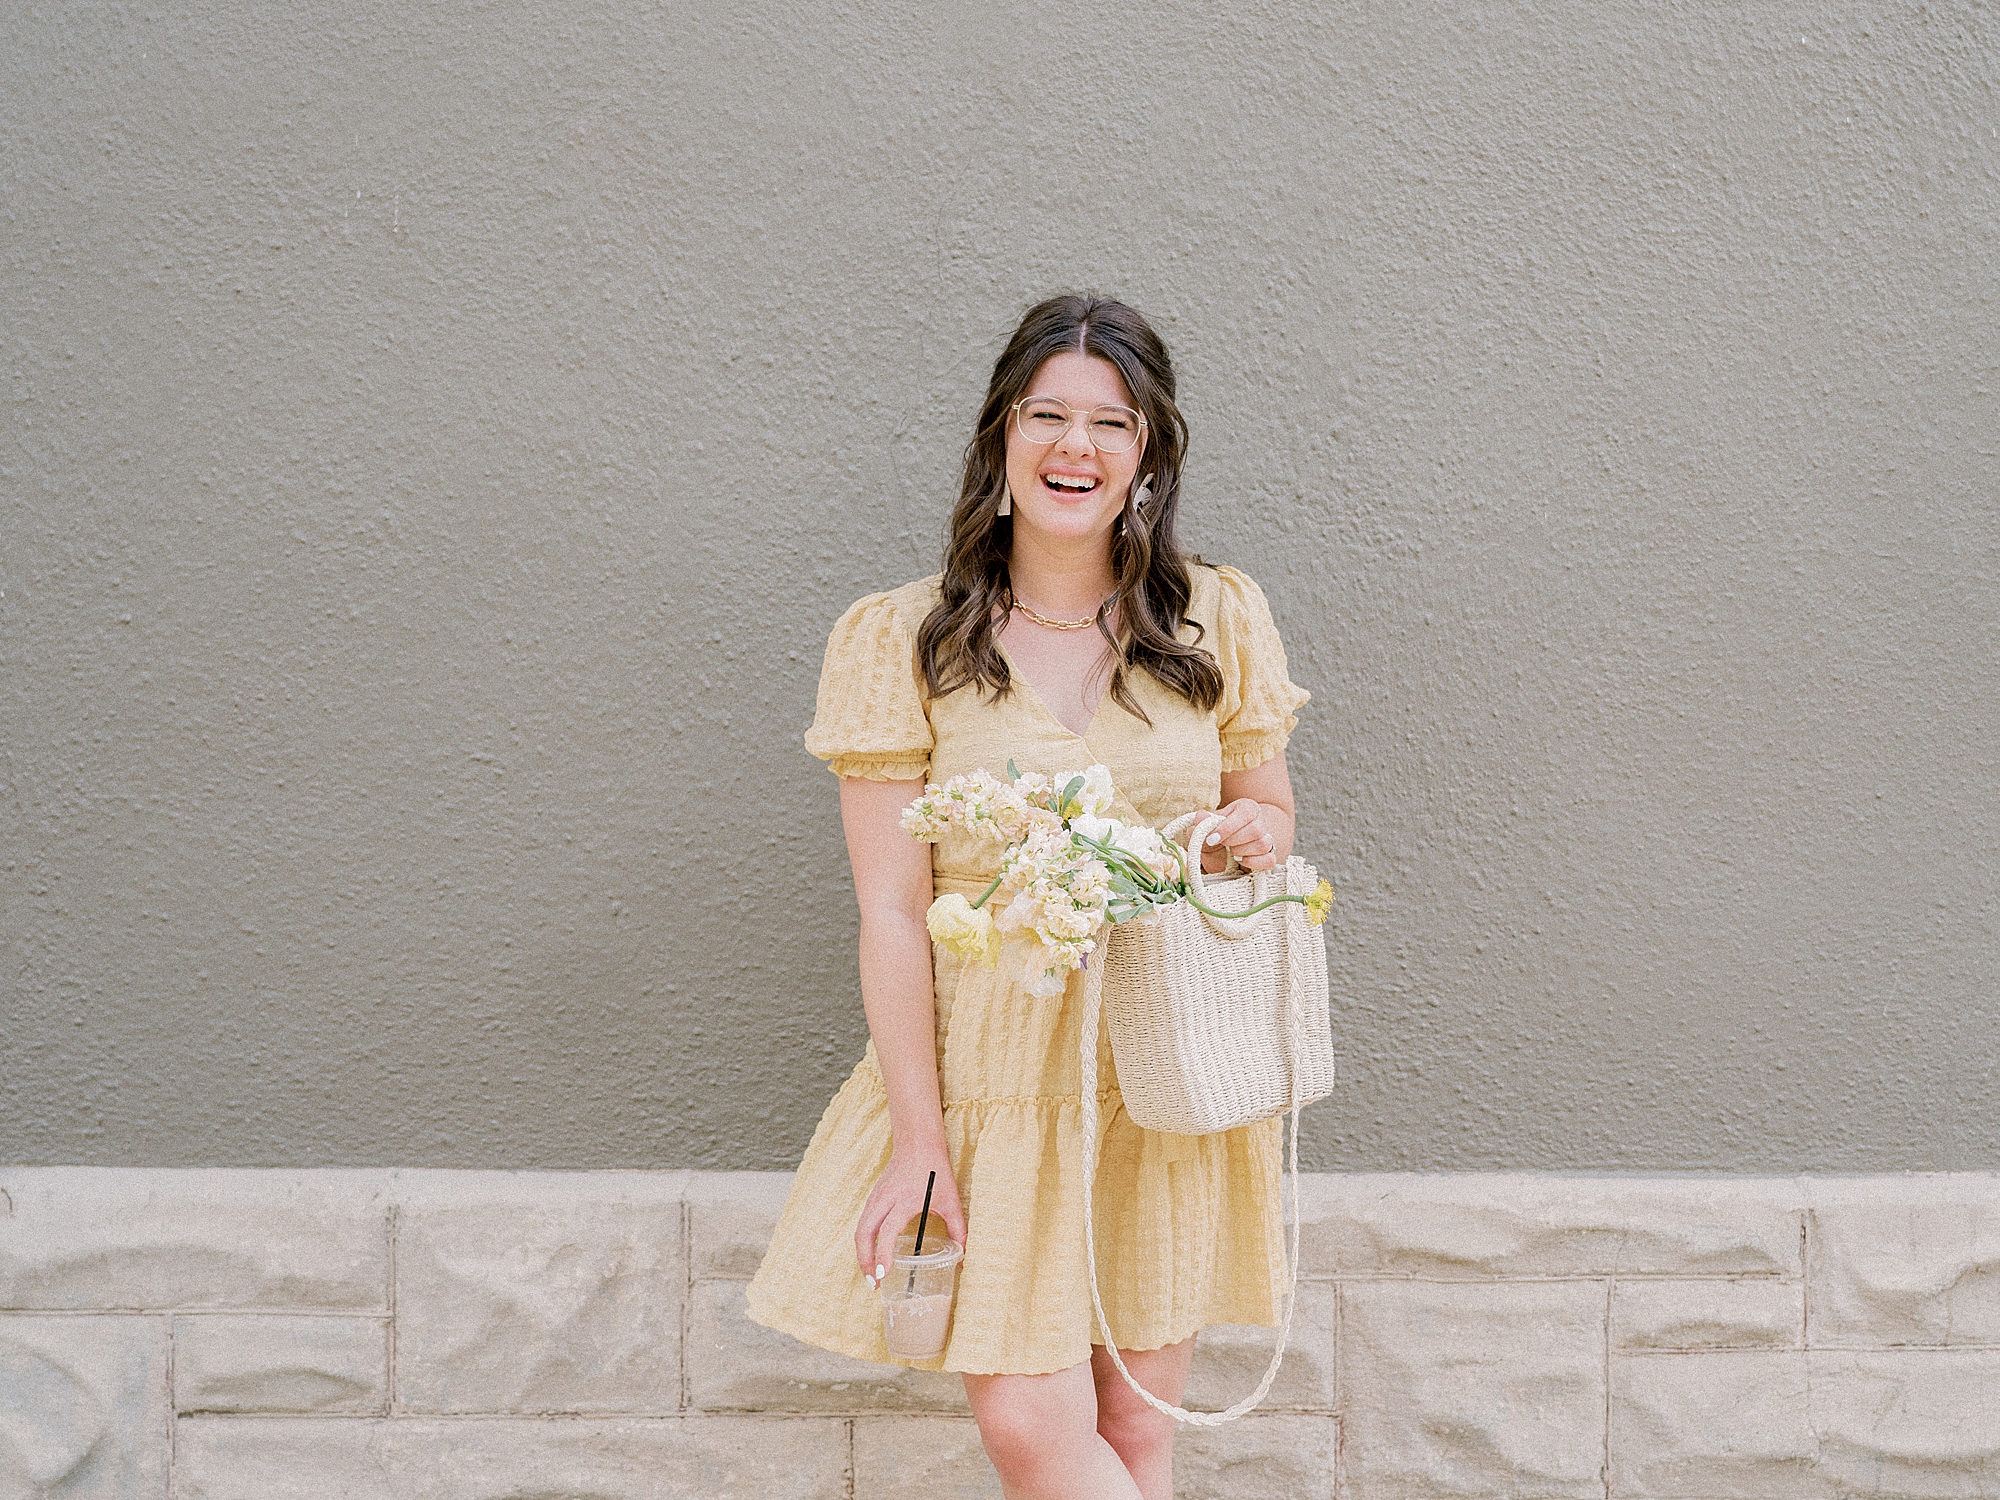 woman poses against wall in yellow dress with flowers